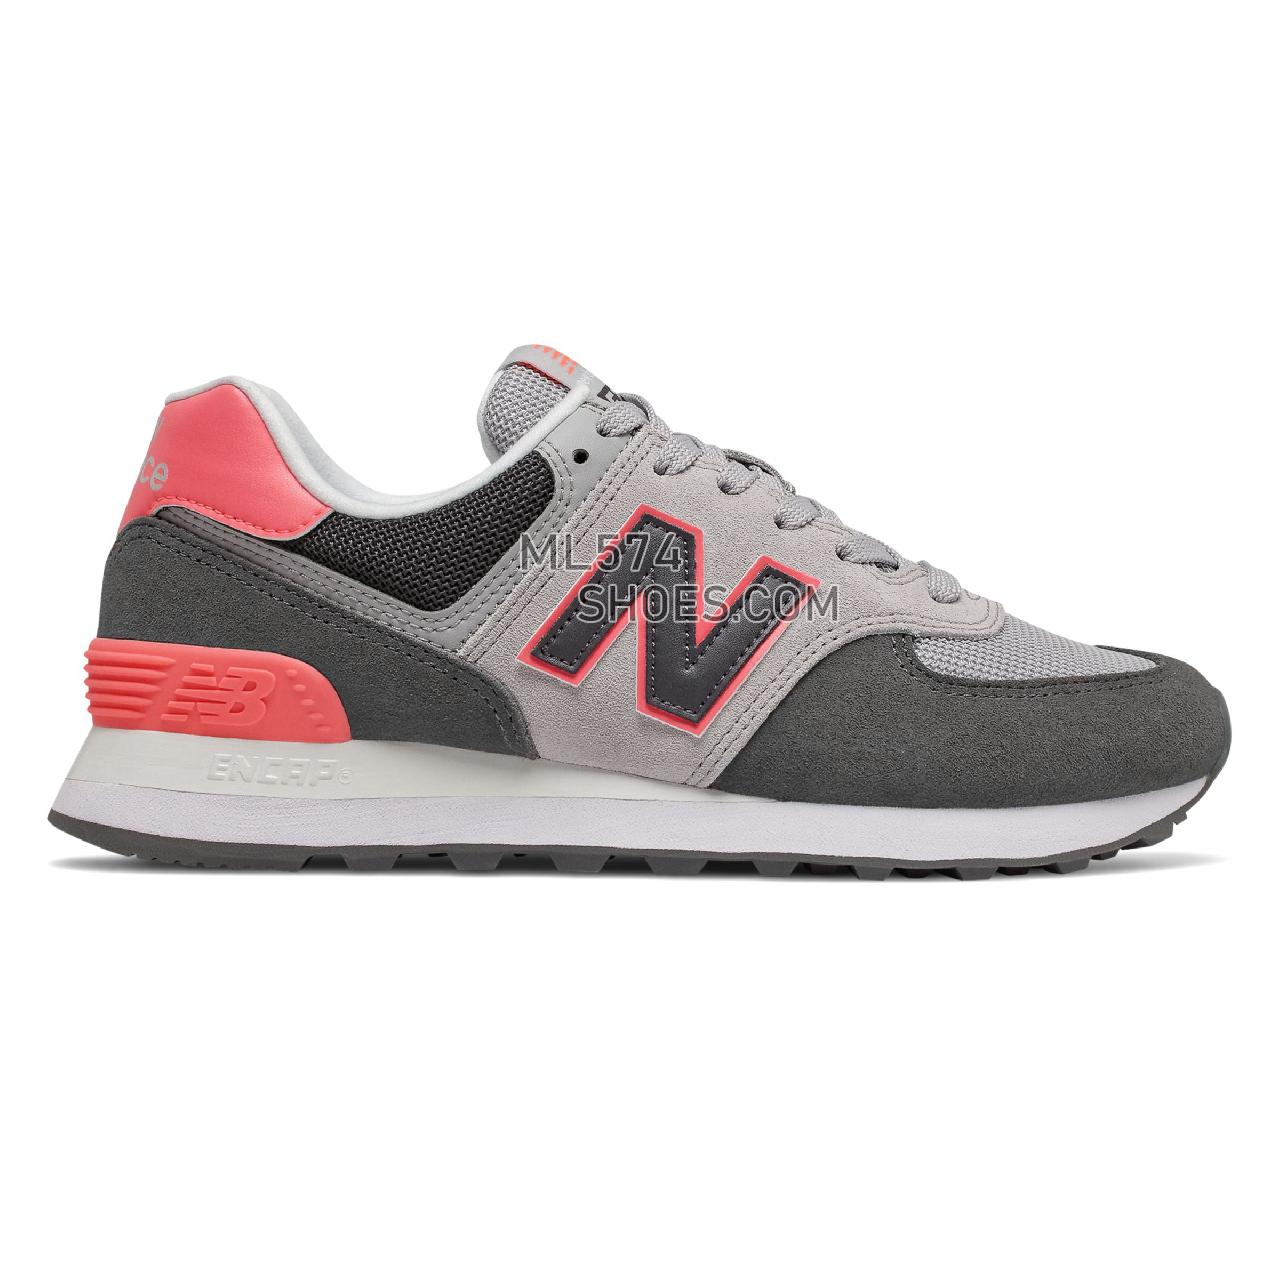 New Balance 574 - Women's Whats Trending - Black with Tahitian Pink and Grey - WL574SOP